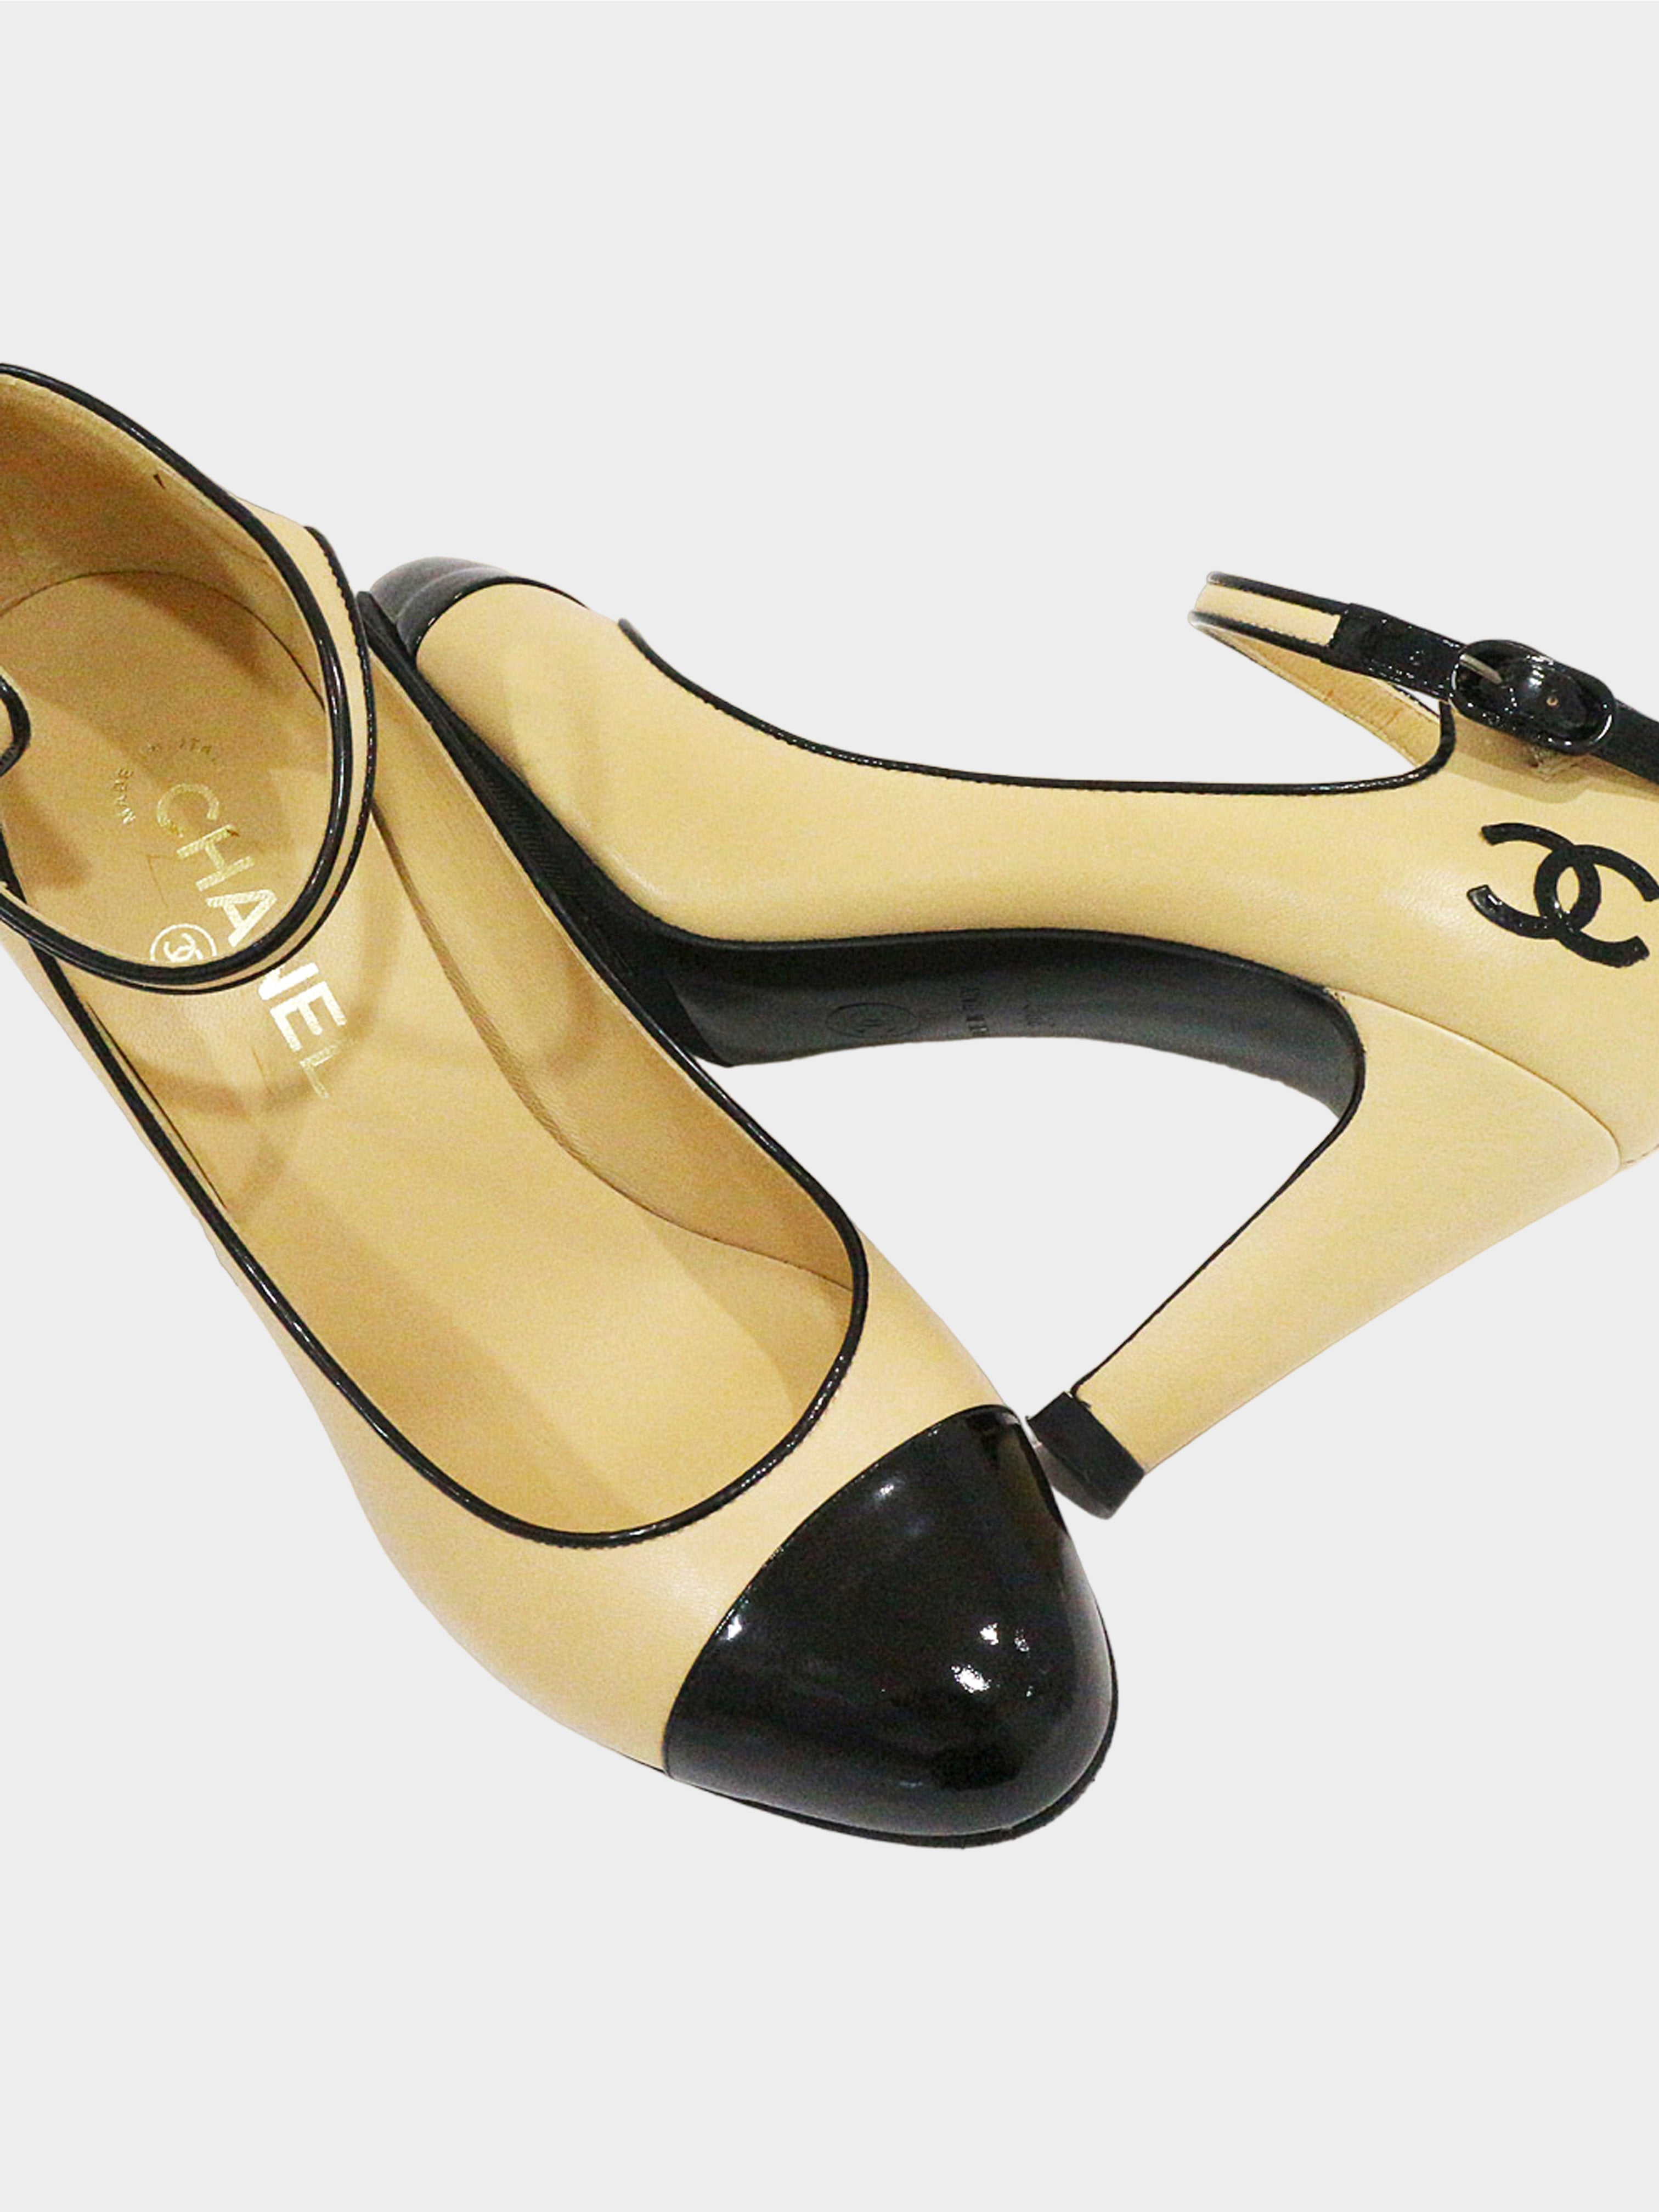 Chanel 2020 Black and Beige Two-tone Mary Jane Pumps